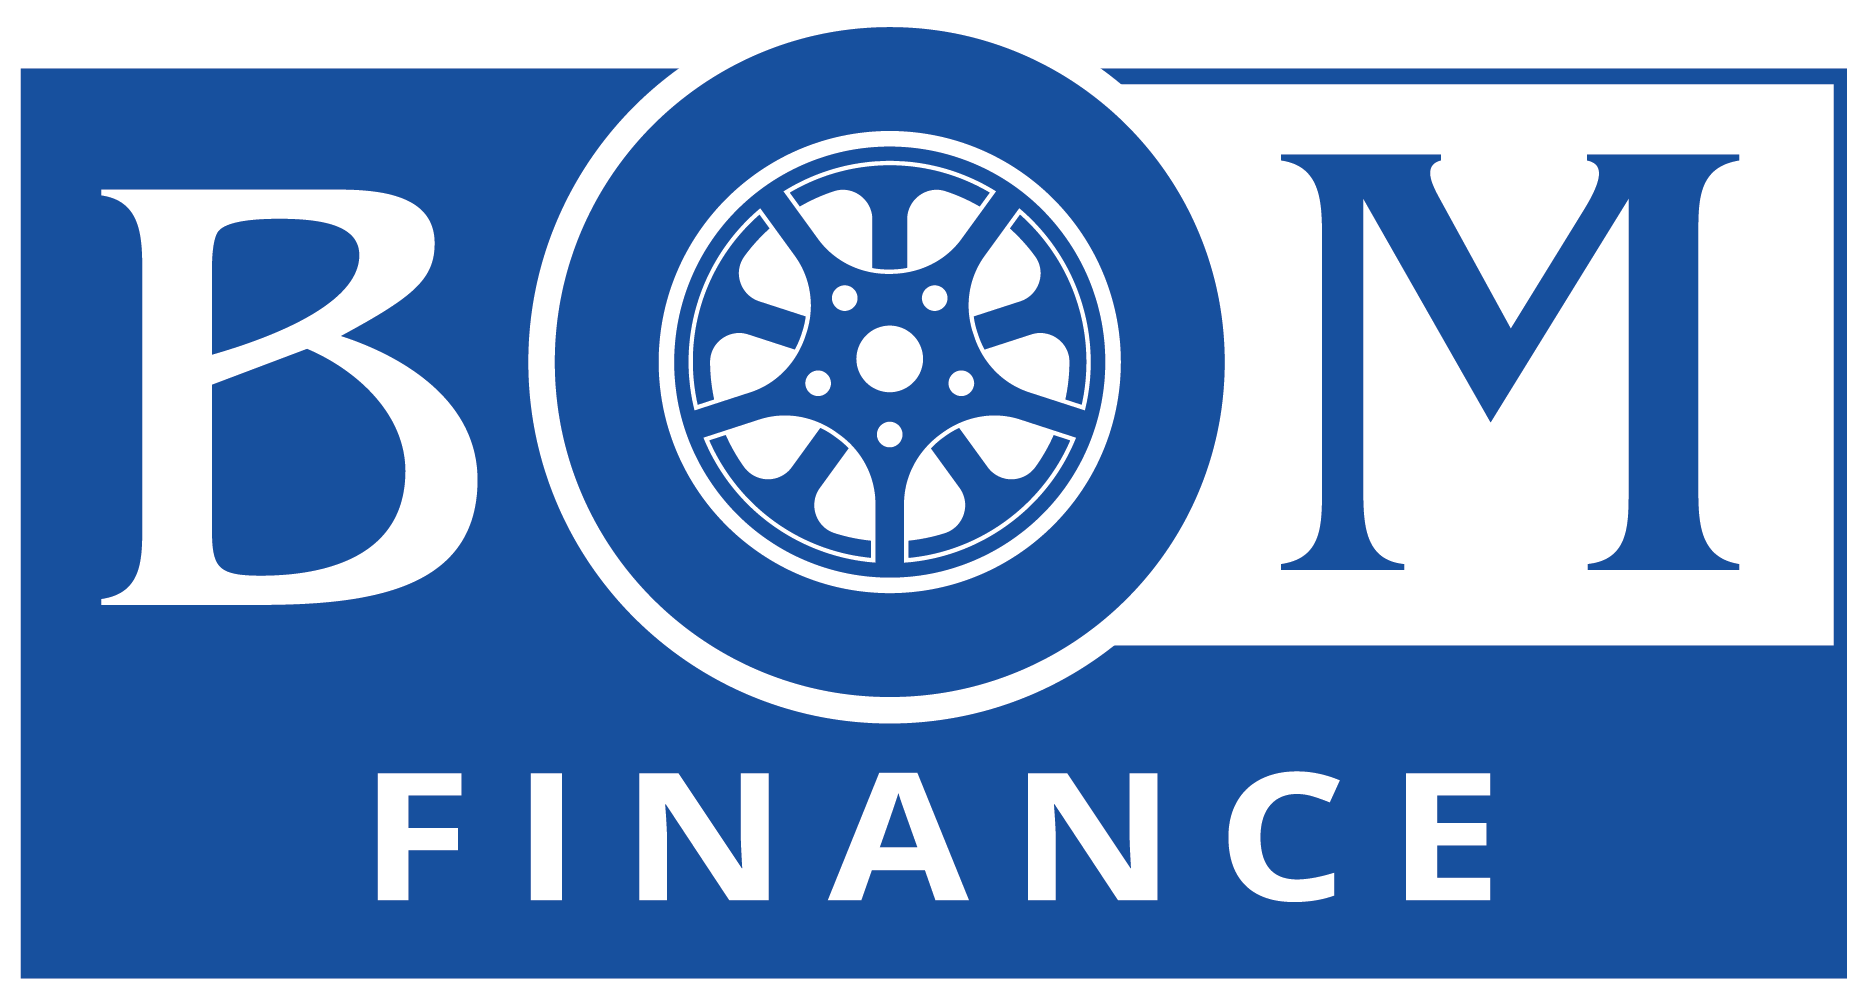 Bay Country Financial Services Footer Logo